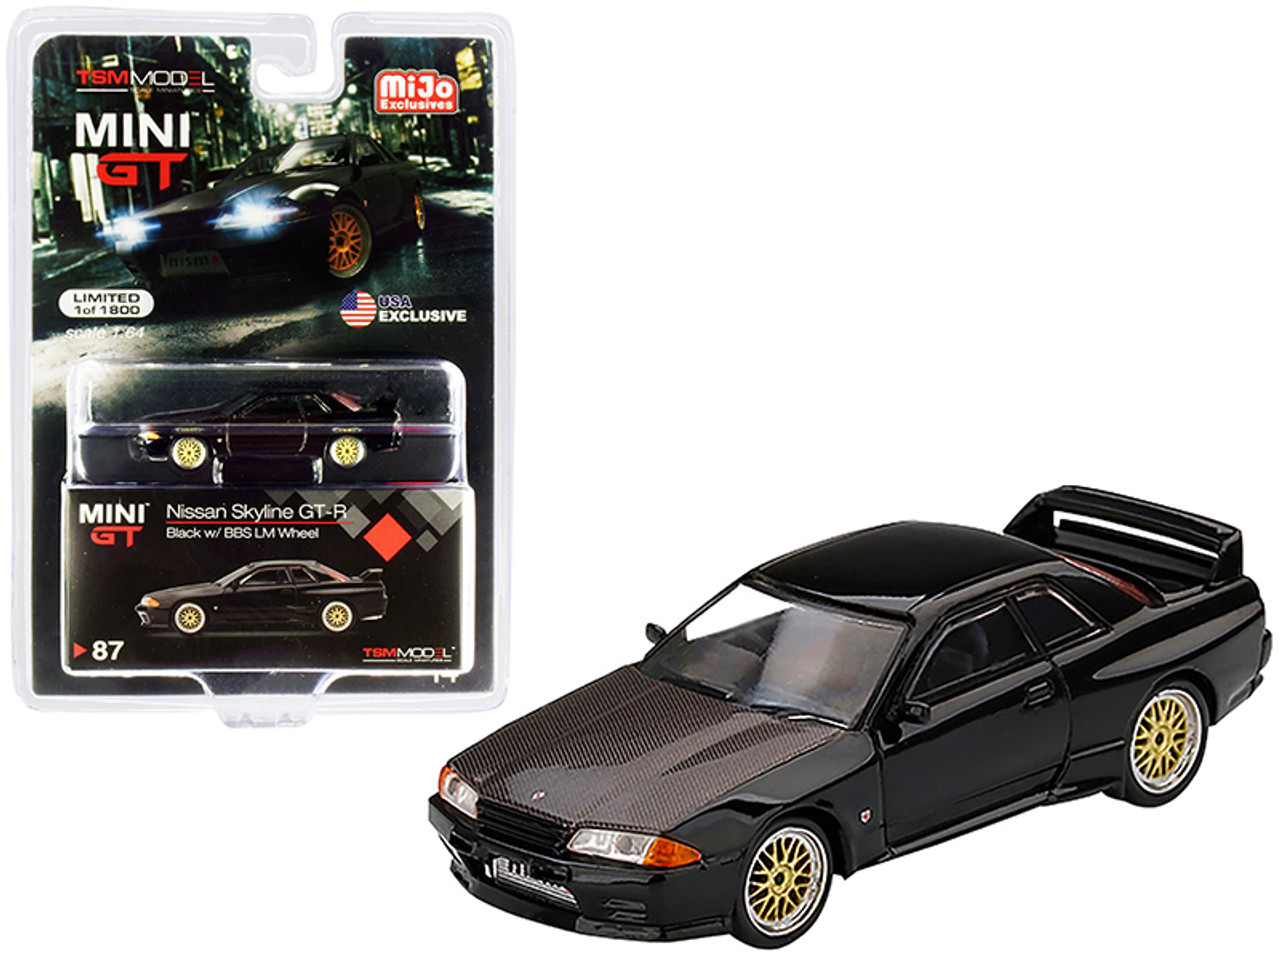 Nissan Skyline GT-R (R32) RHD (Right Hand Drive) Black with BBS LM Wheels and Carbon Hood Limited Edition to 1800 pieces Worldwide 1/64 Diecast Model Car by True Scale Miniatures